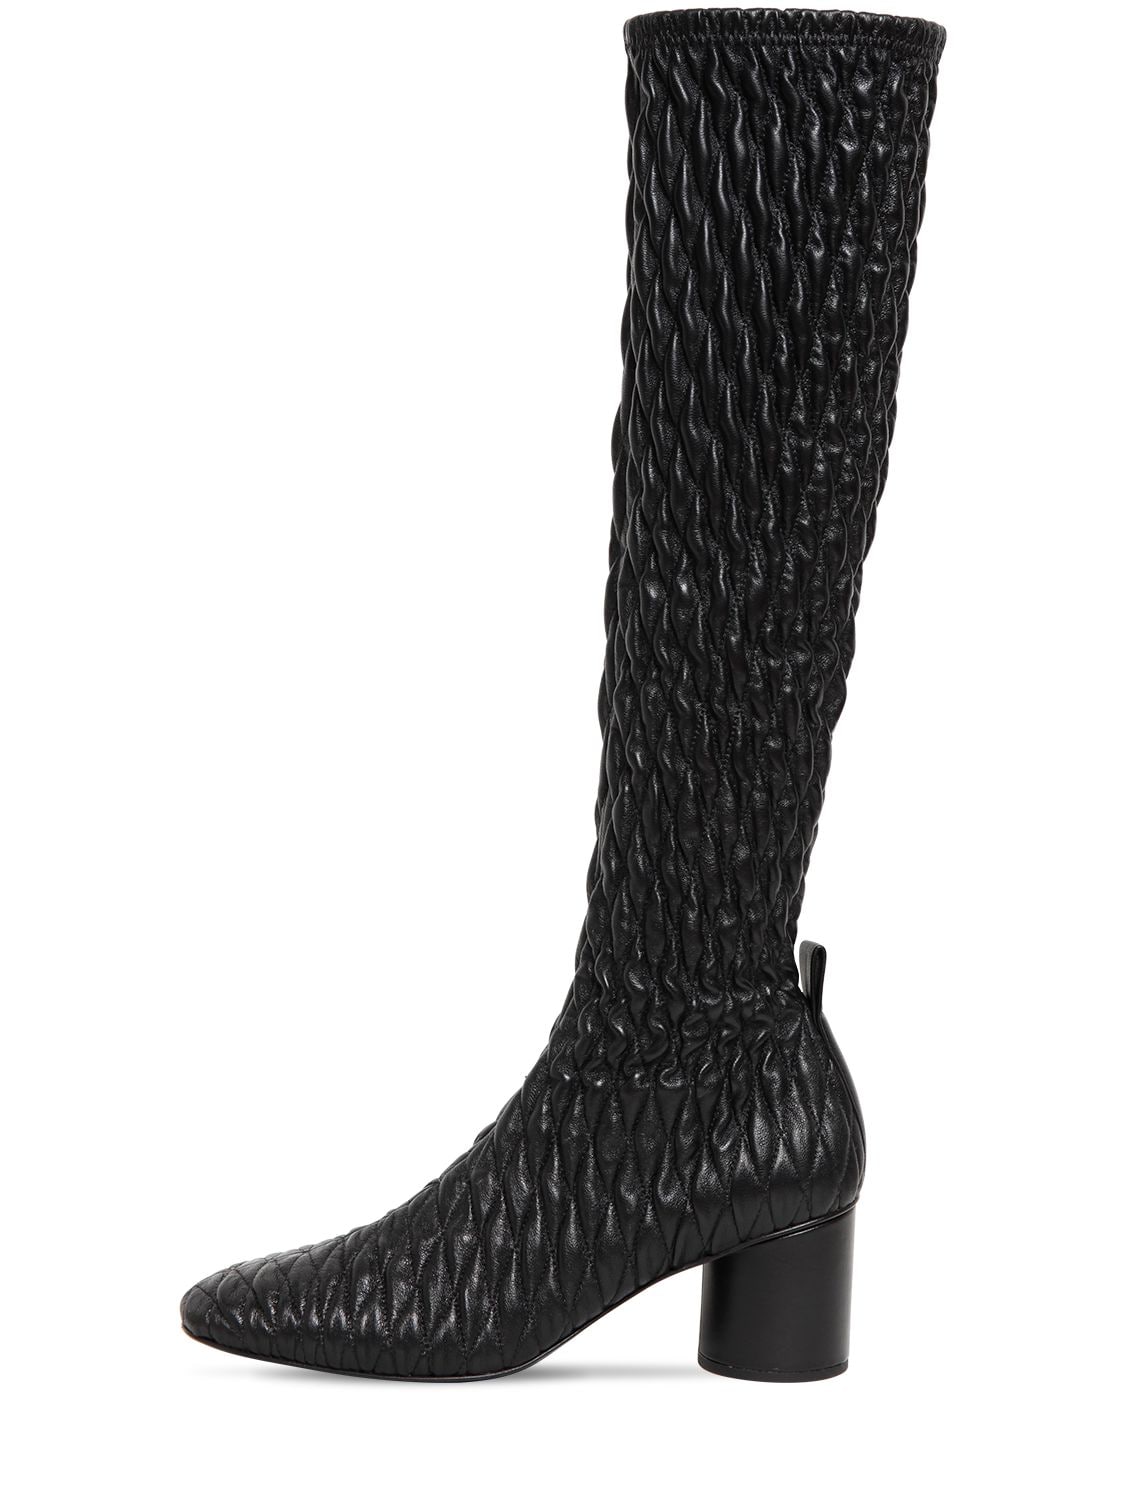 tall boots with stretch back